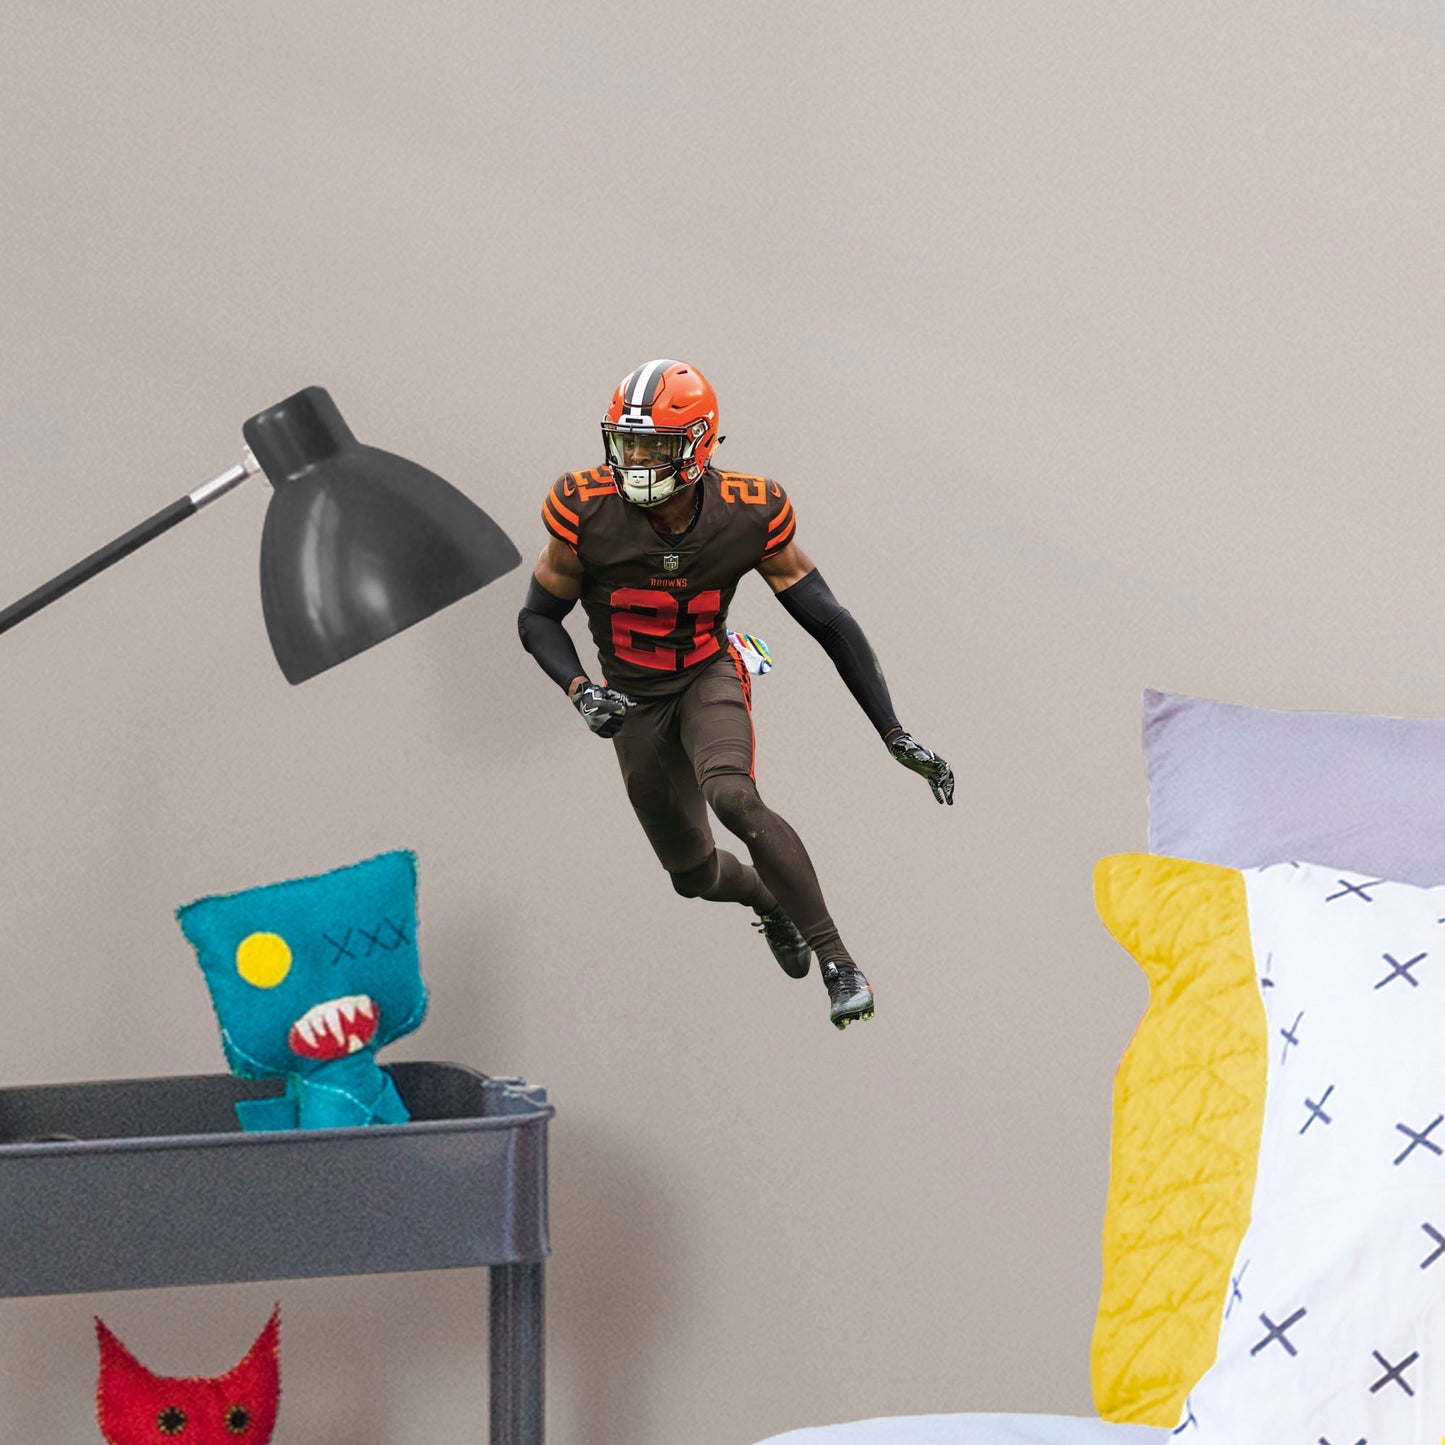 Large Athlete + 2 Decals (11"W x 16"H) Bring the action of the NFL into your home with a wall decal of Denzel Ward! High quality, durable, and tear resistant, you'll be able to stick and move it as many times as you want to create the ultimate football experience in any room!